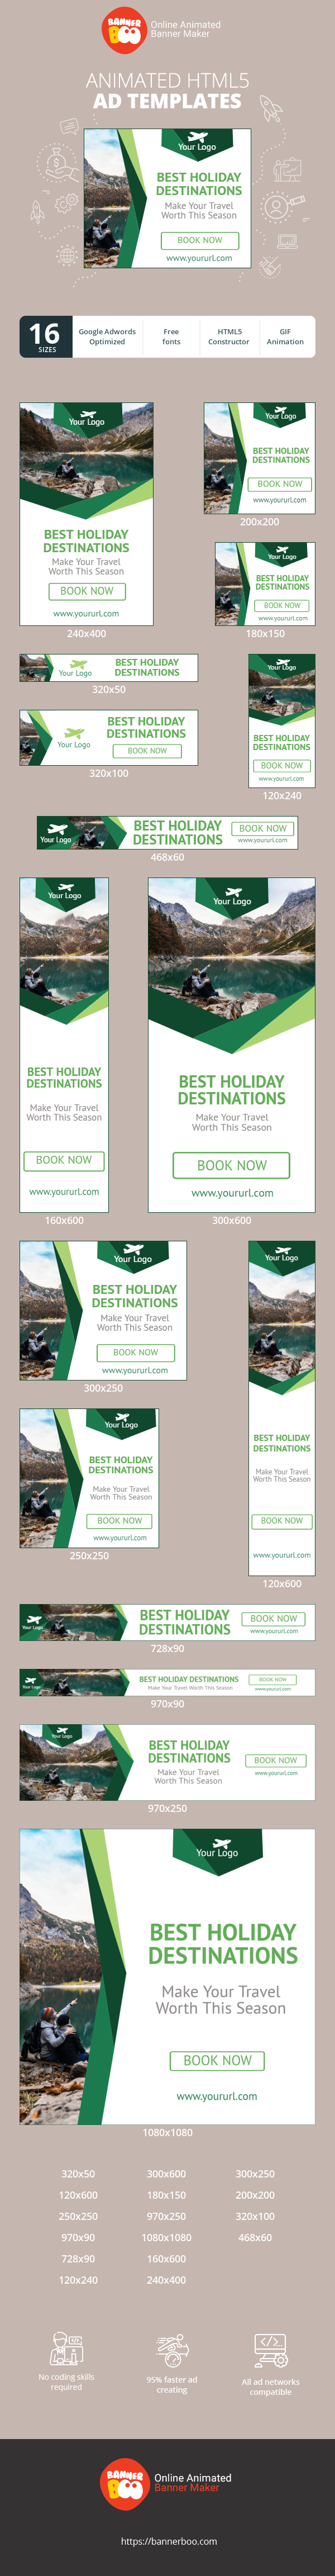 Banner ad template — Best Holiday Destinations — Make Your Travel Worth This Season!